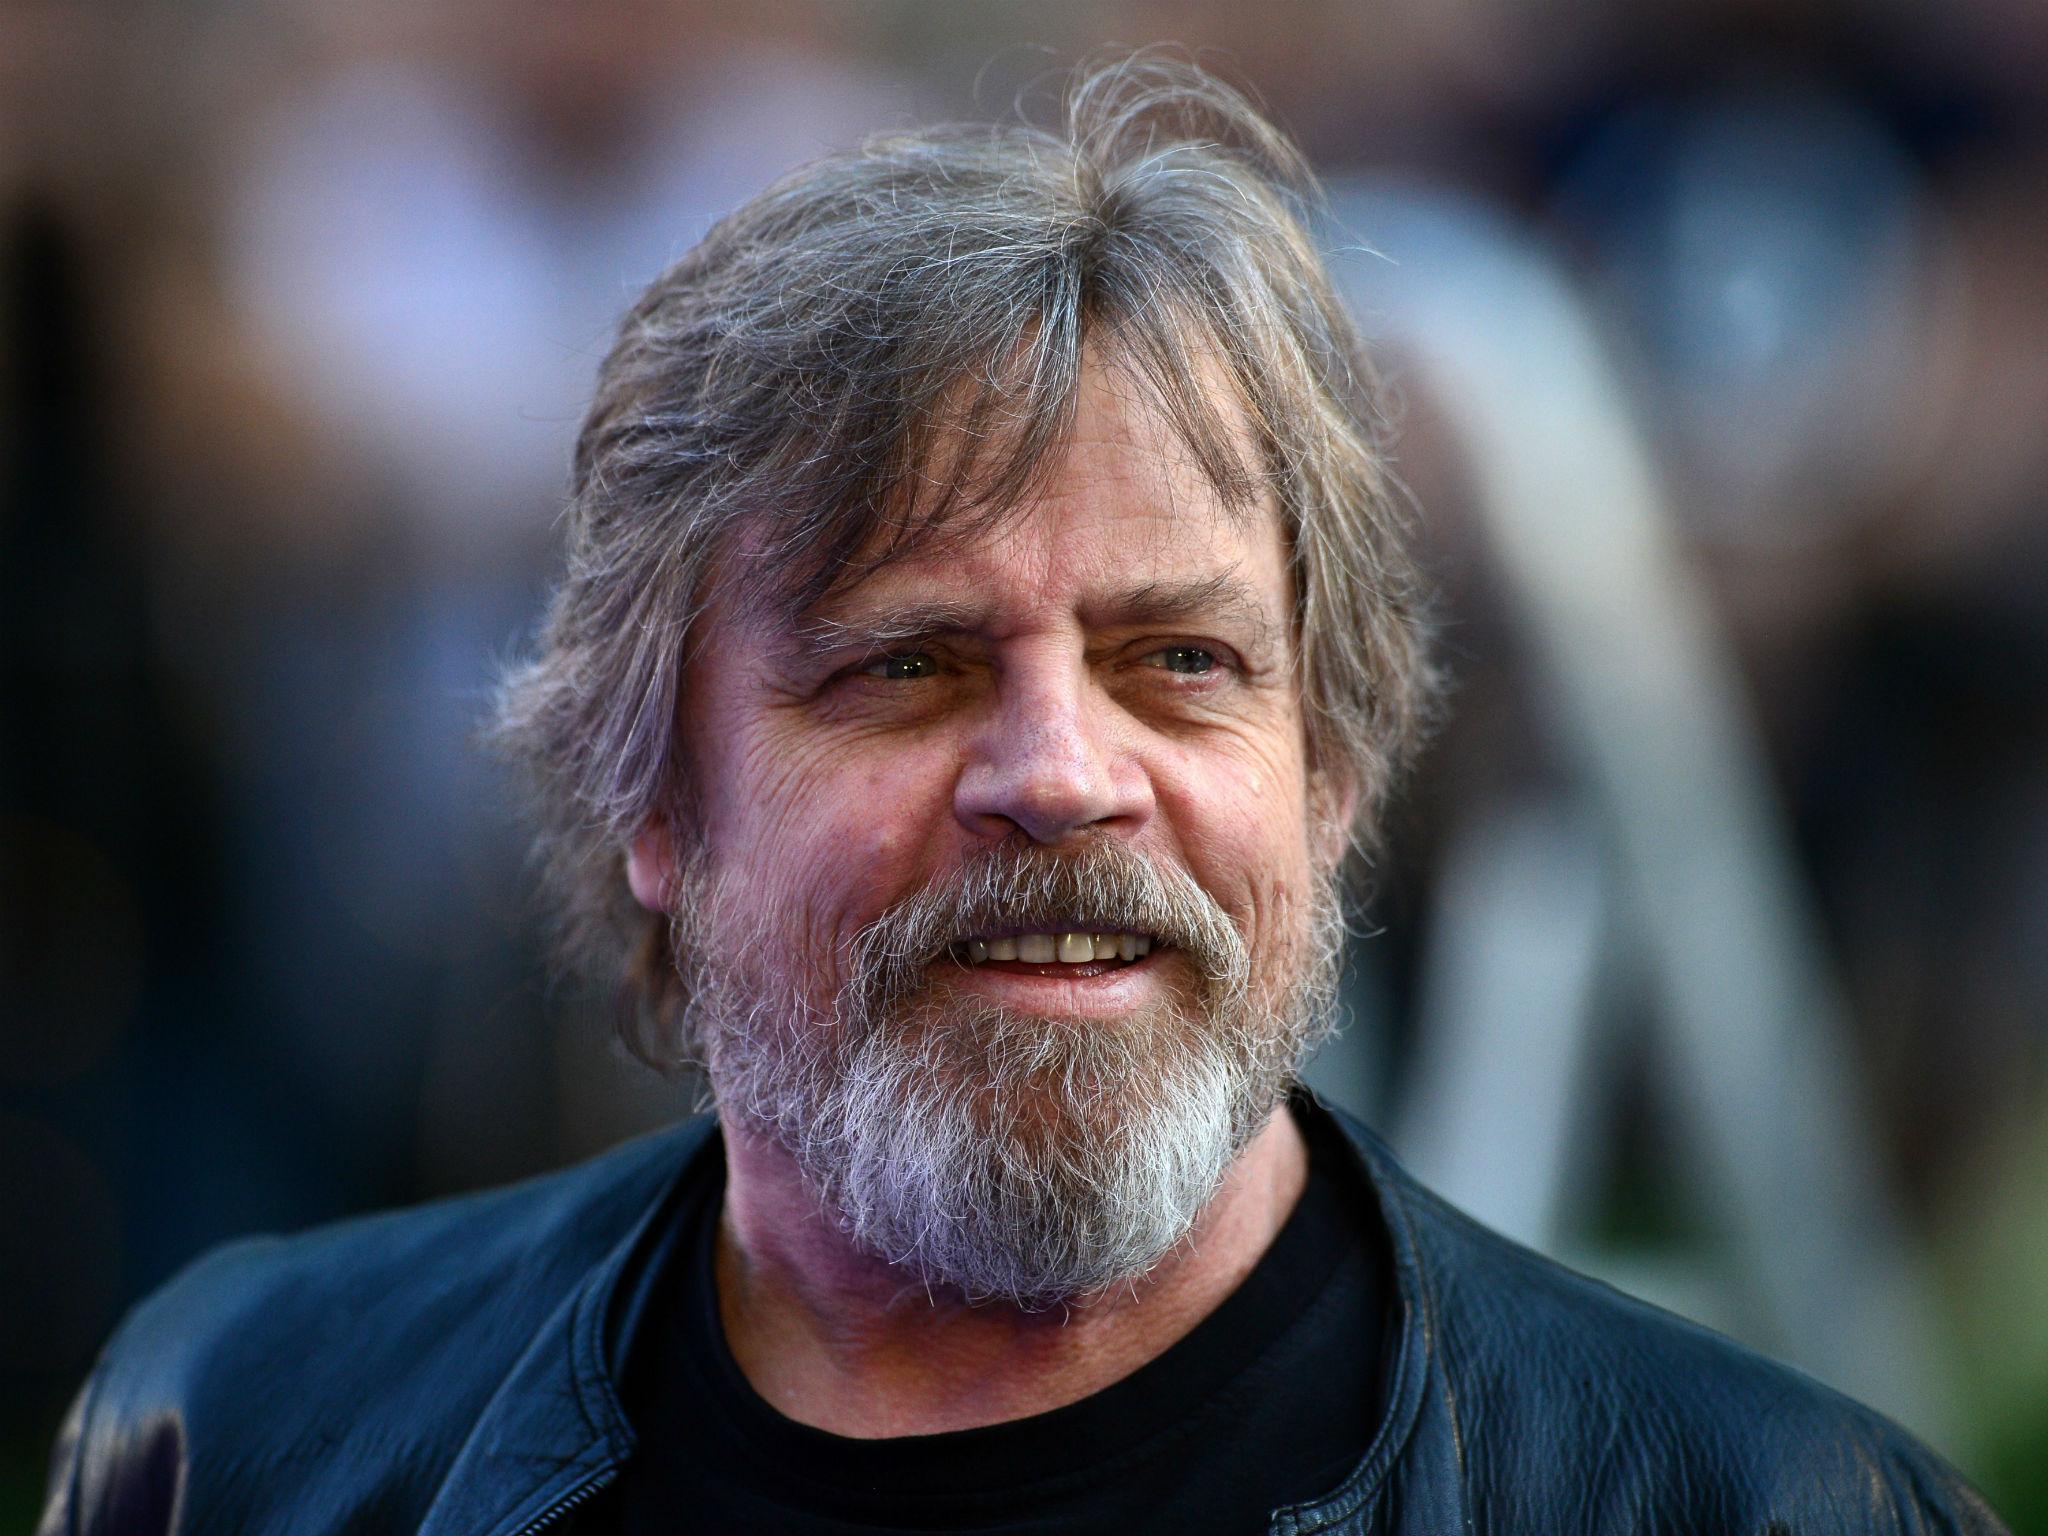 Mark Hamill saved by guide after slipping on dangerous Skellig Michael  while filming Star Wars: The Force Awakens, The Independent